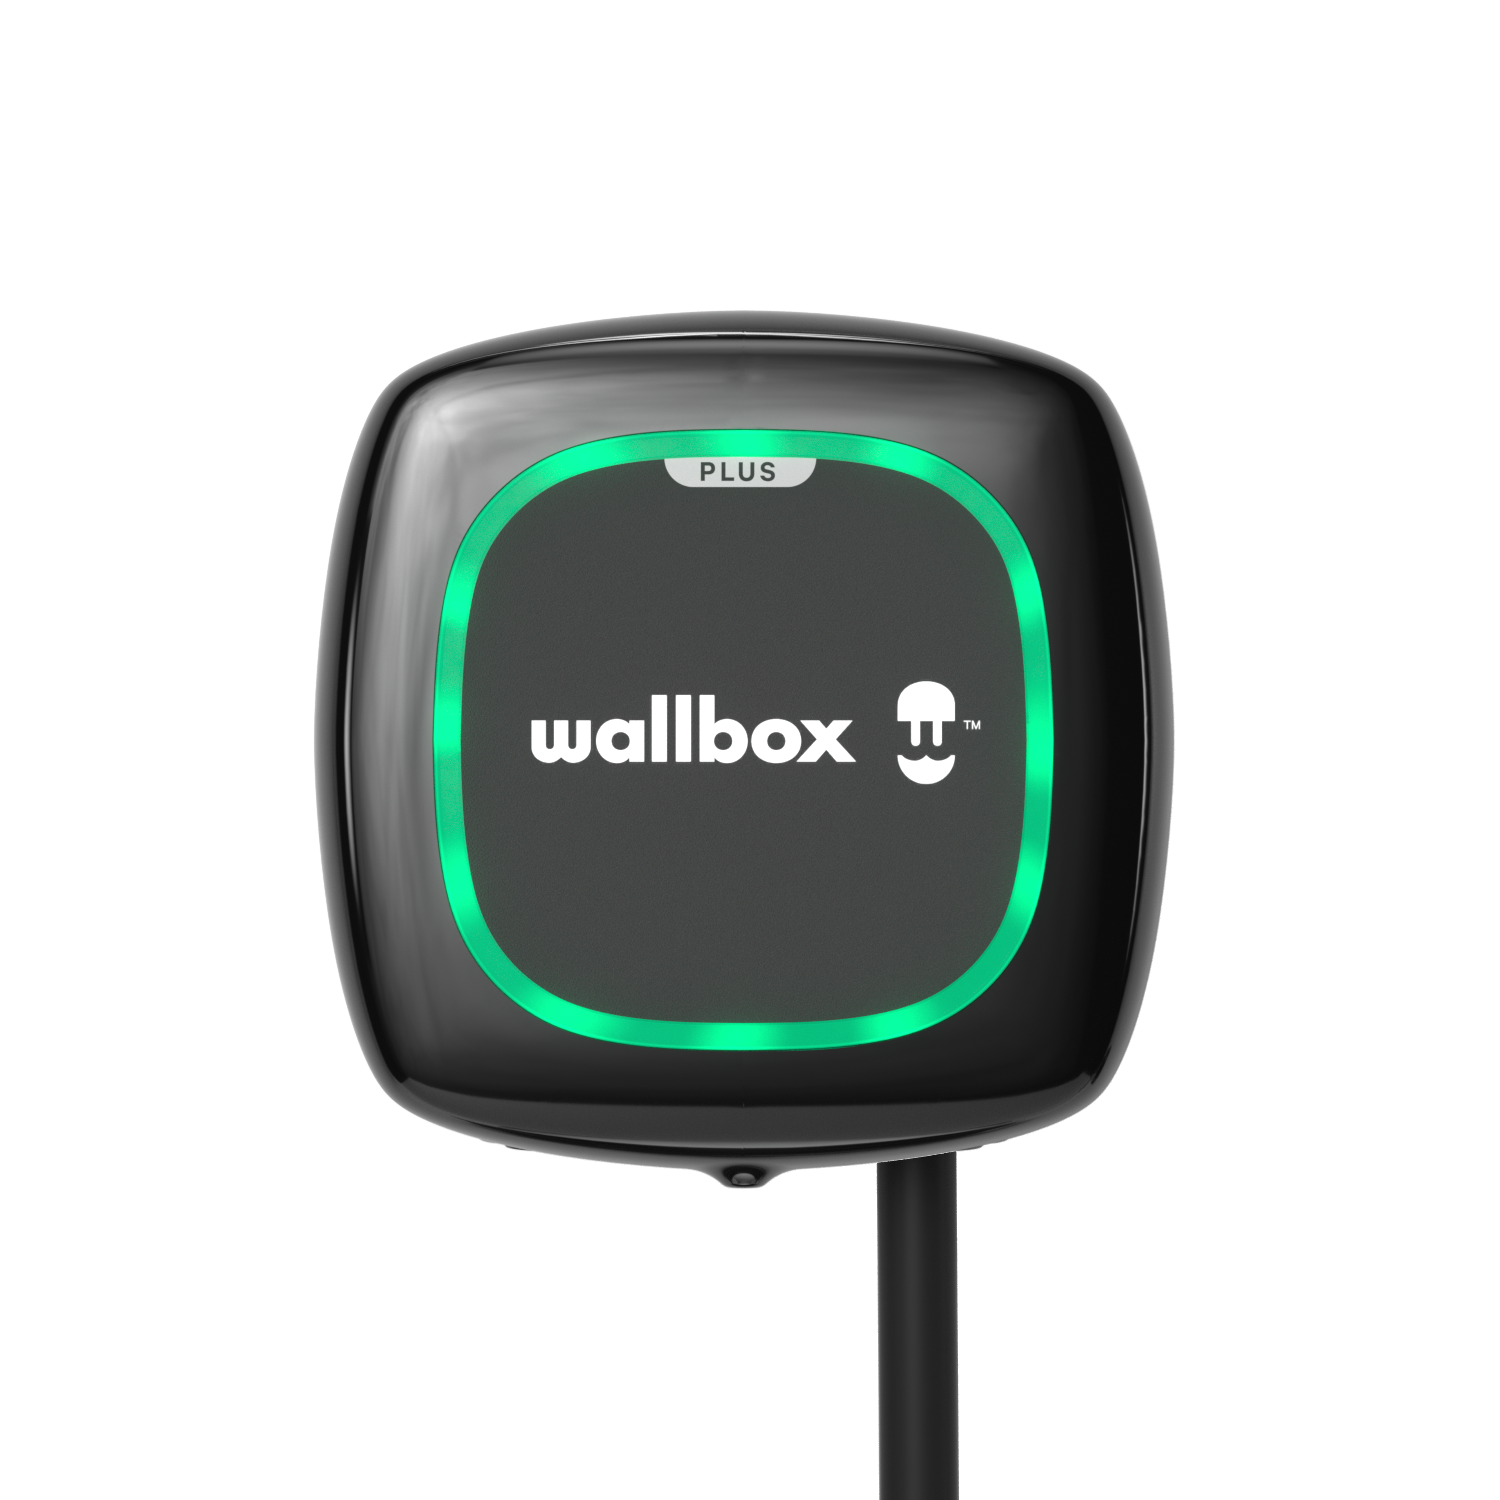 Wallbox Pulsar Plus - Charging station with Fixed Charging Cable - 1 & 3-phase up to 22 kW